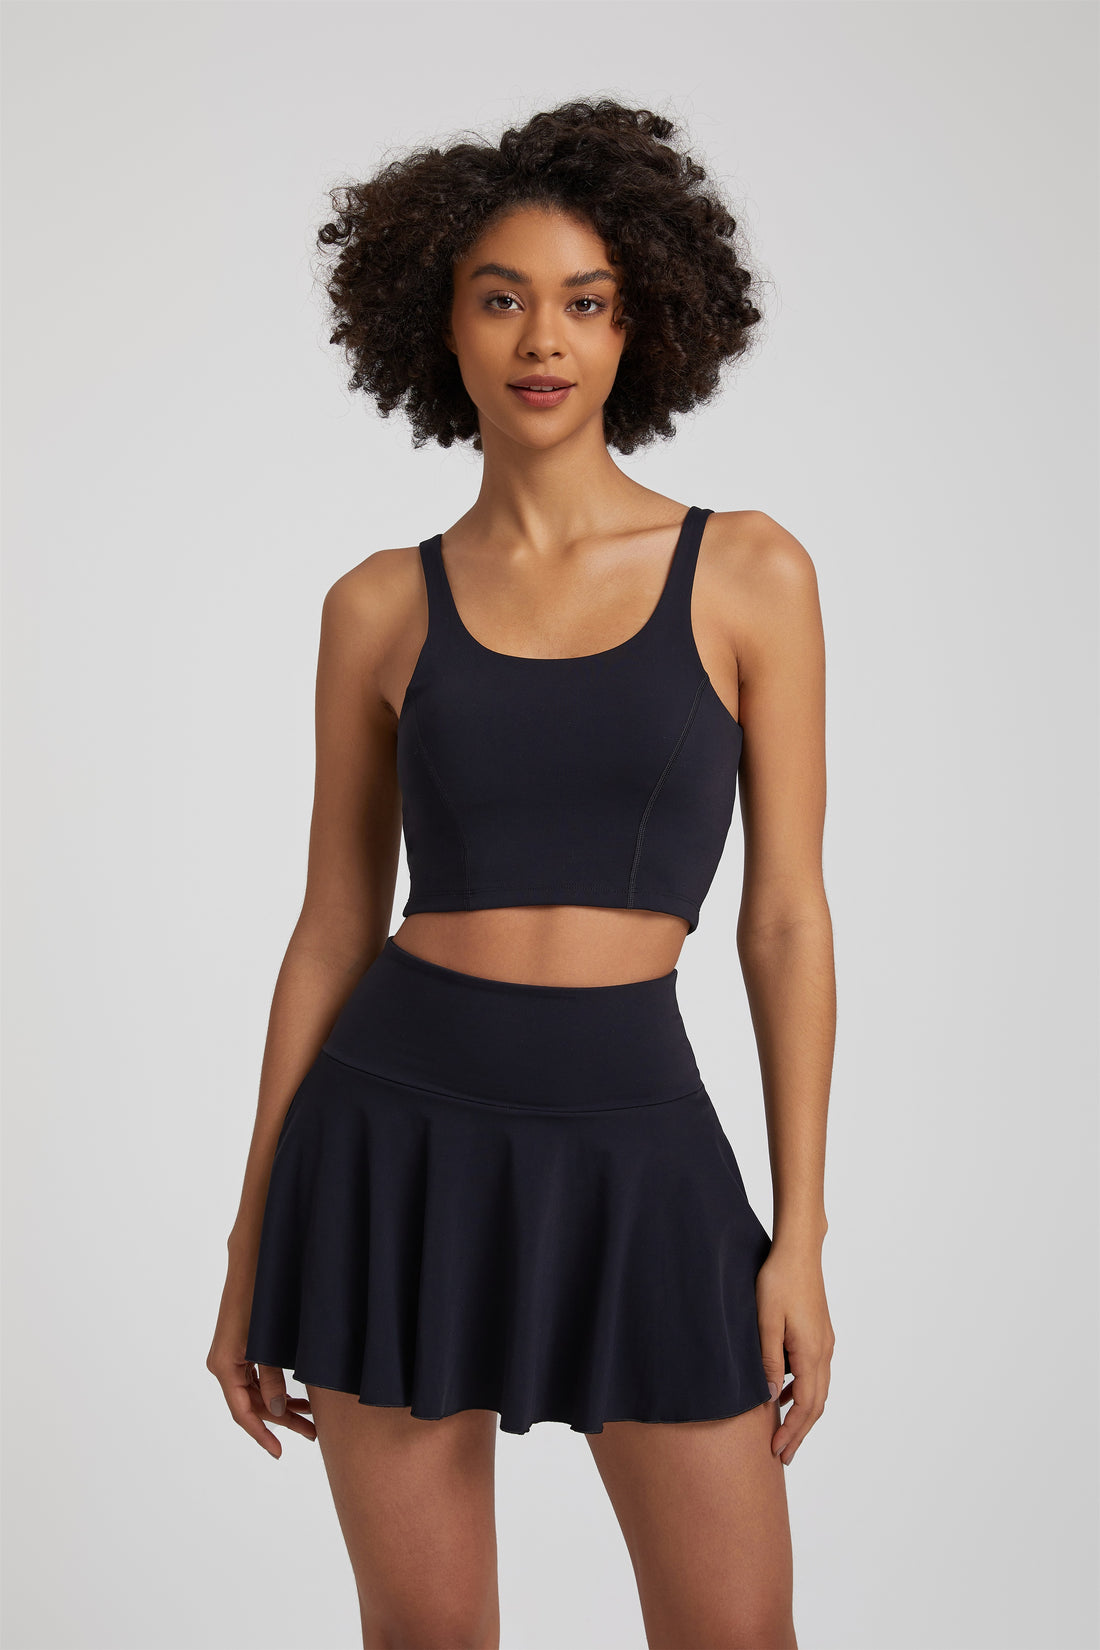 My Heart Is Pure Quick-Dry Butter Black Tennis Skort